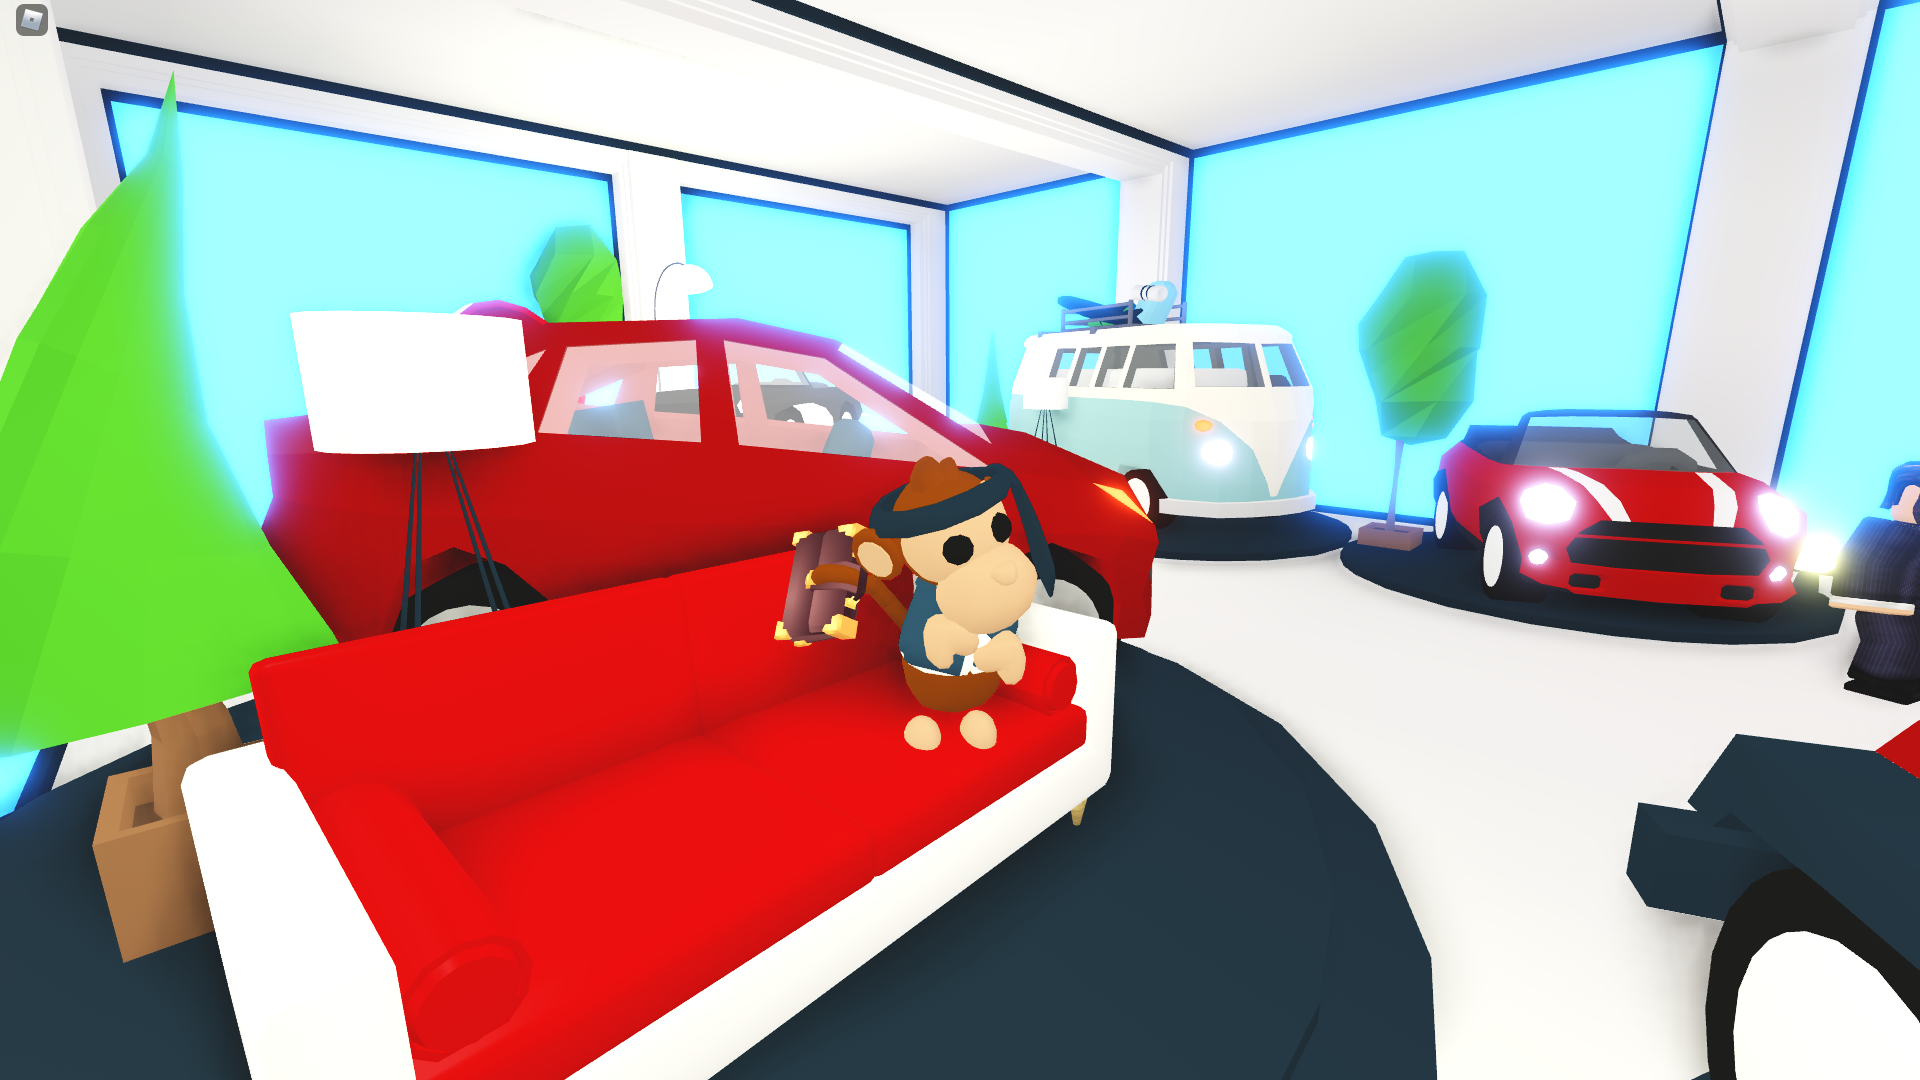 Avd1rl6mqv2jym - how add another place to a roblox game